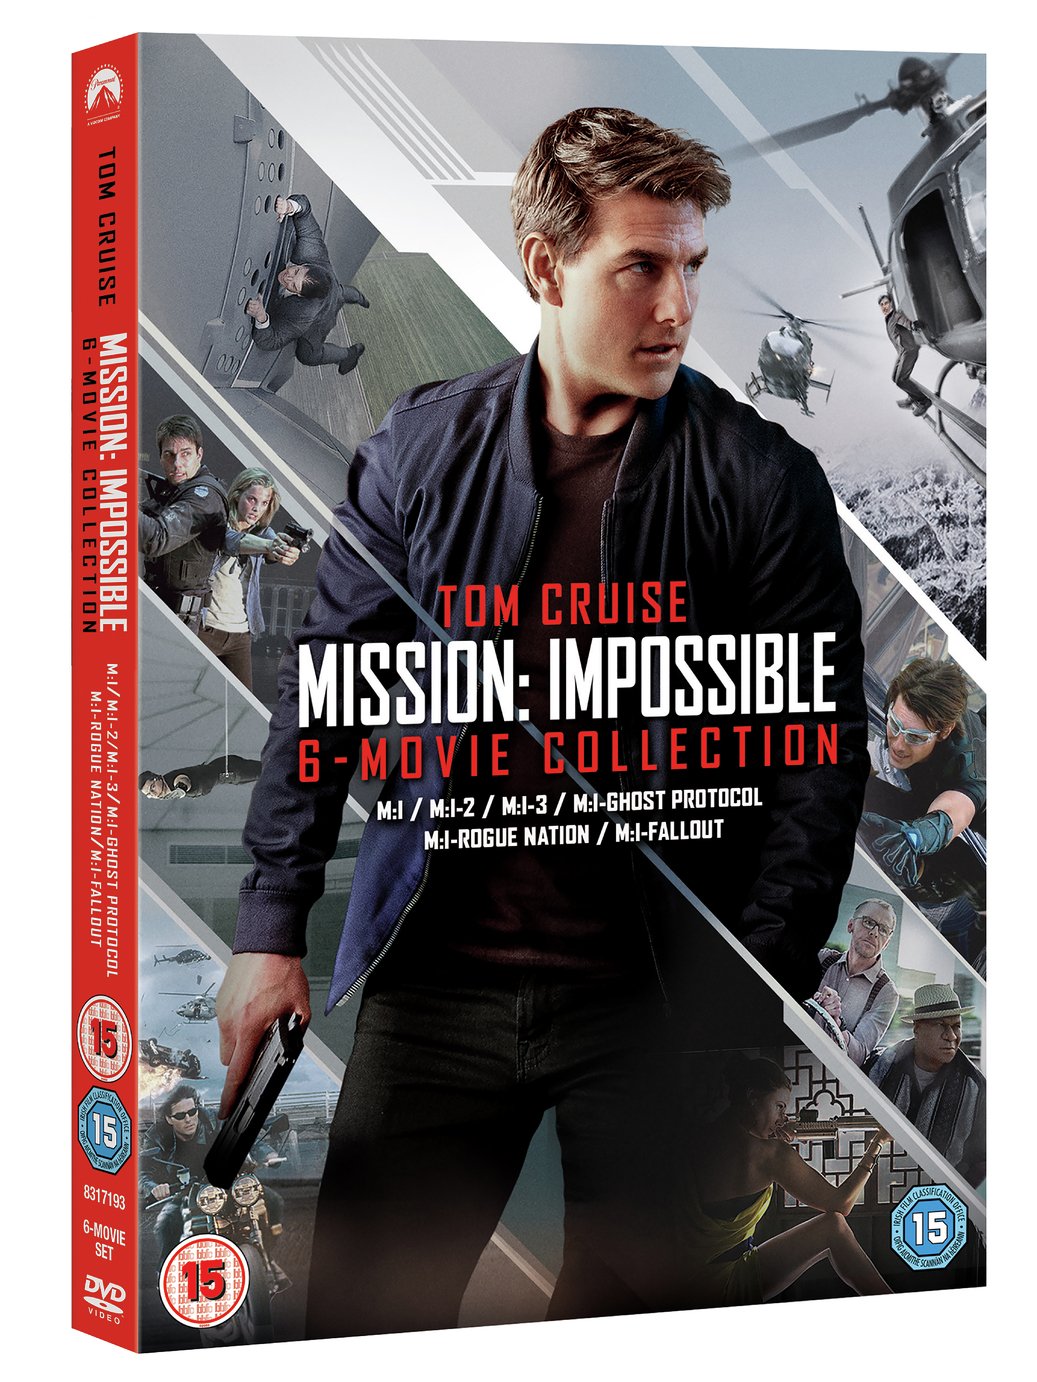 Mission: Impossible The 6 Movie Collection DVD Box Set Review